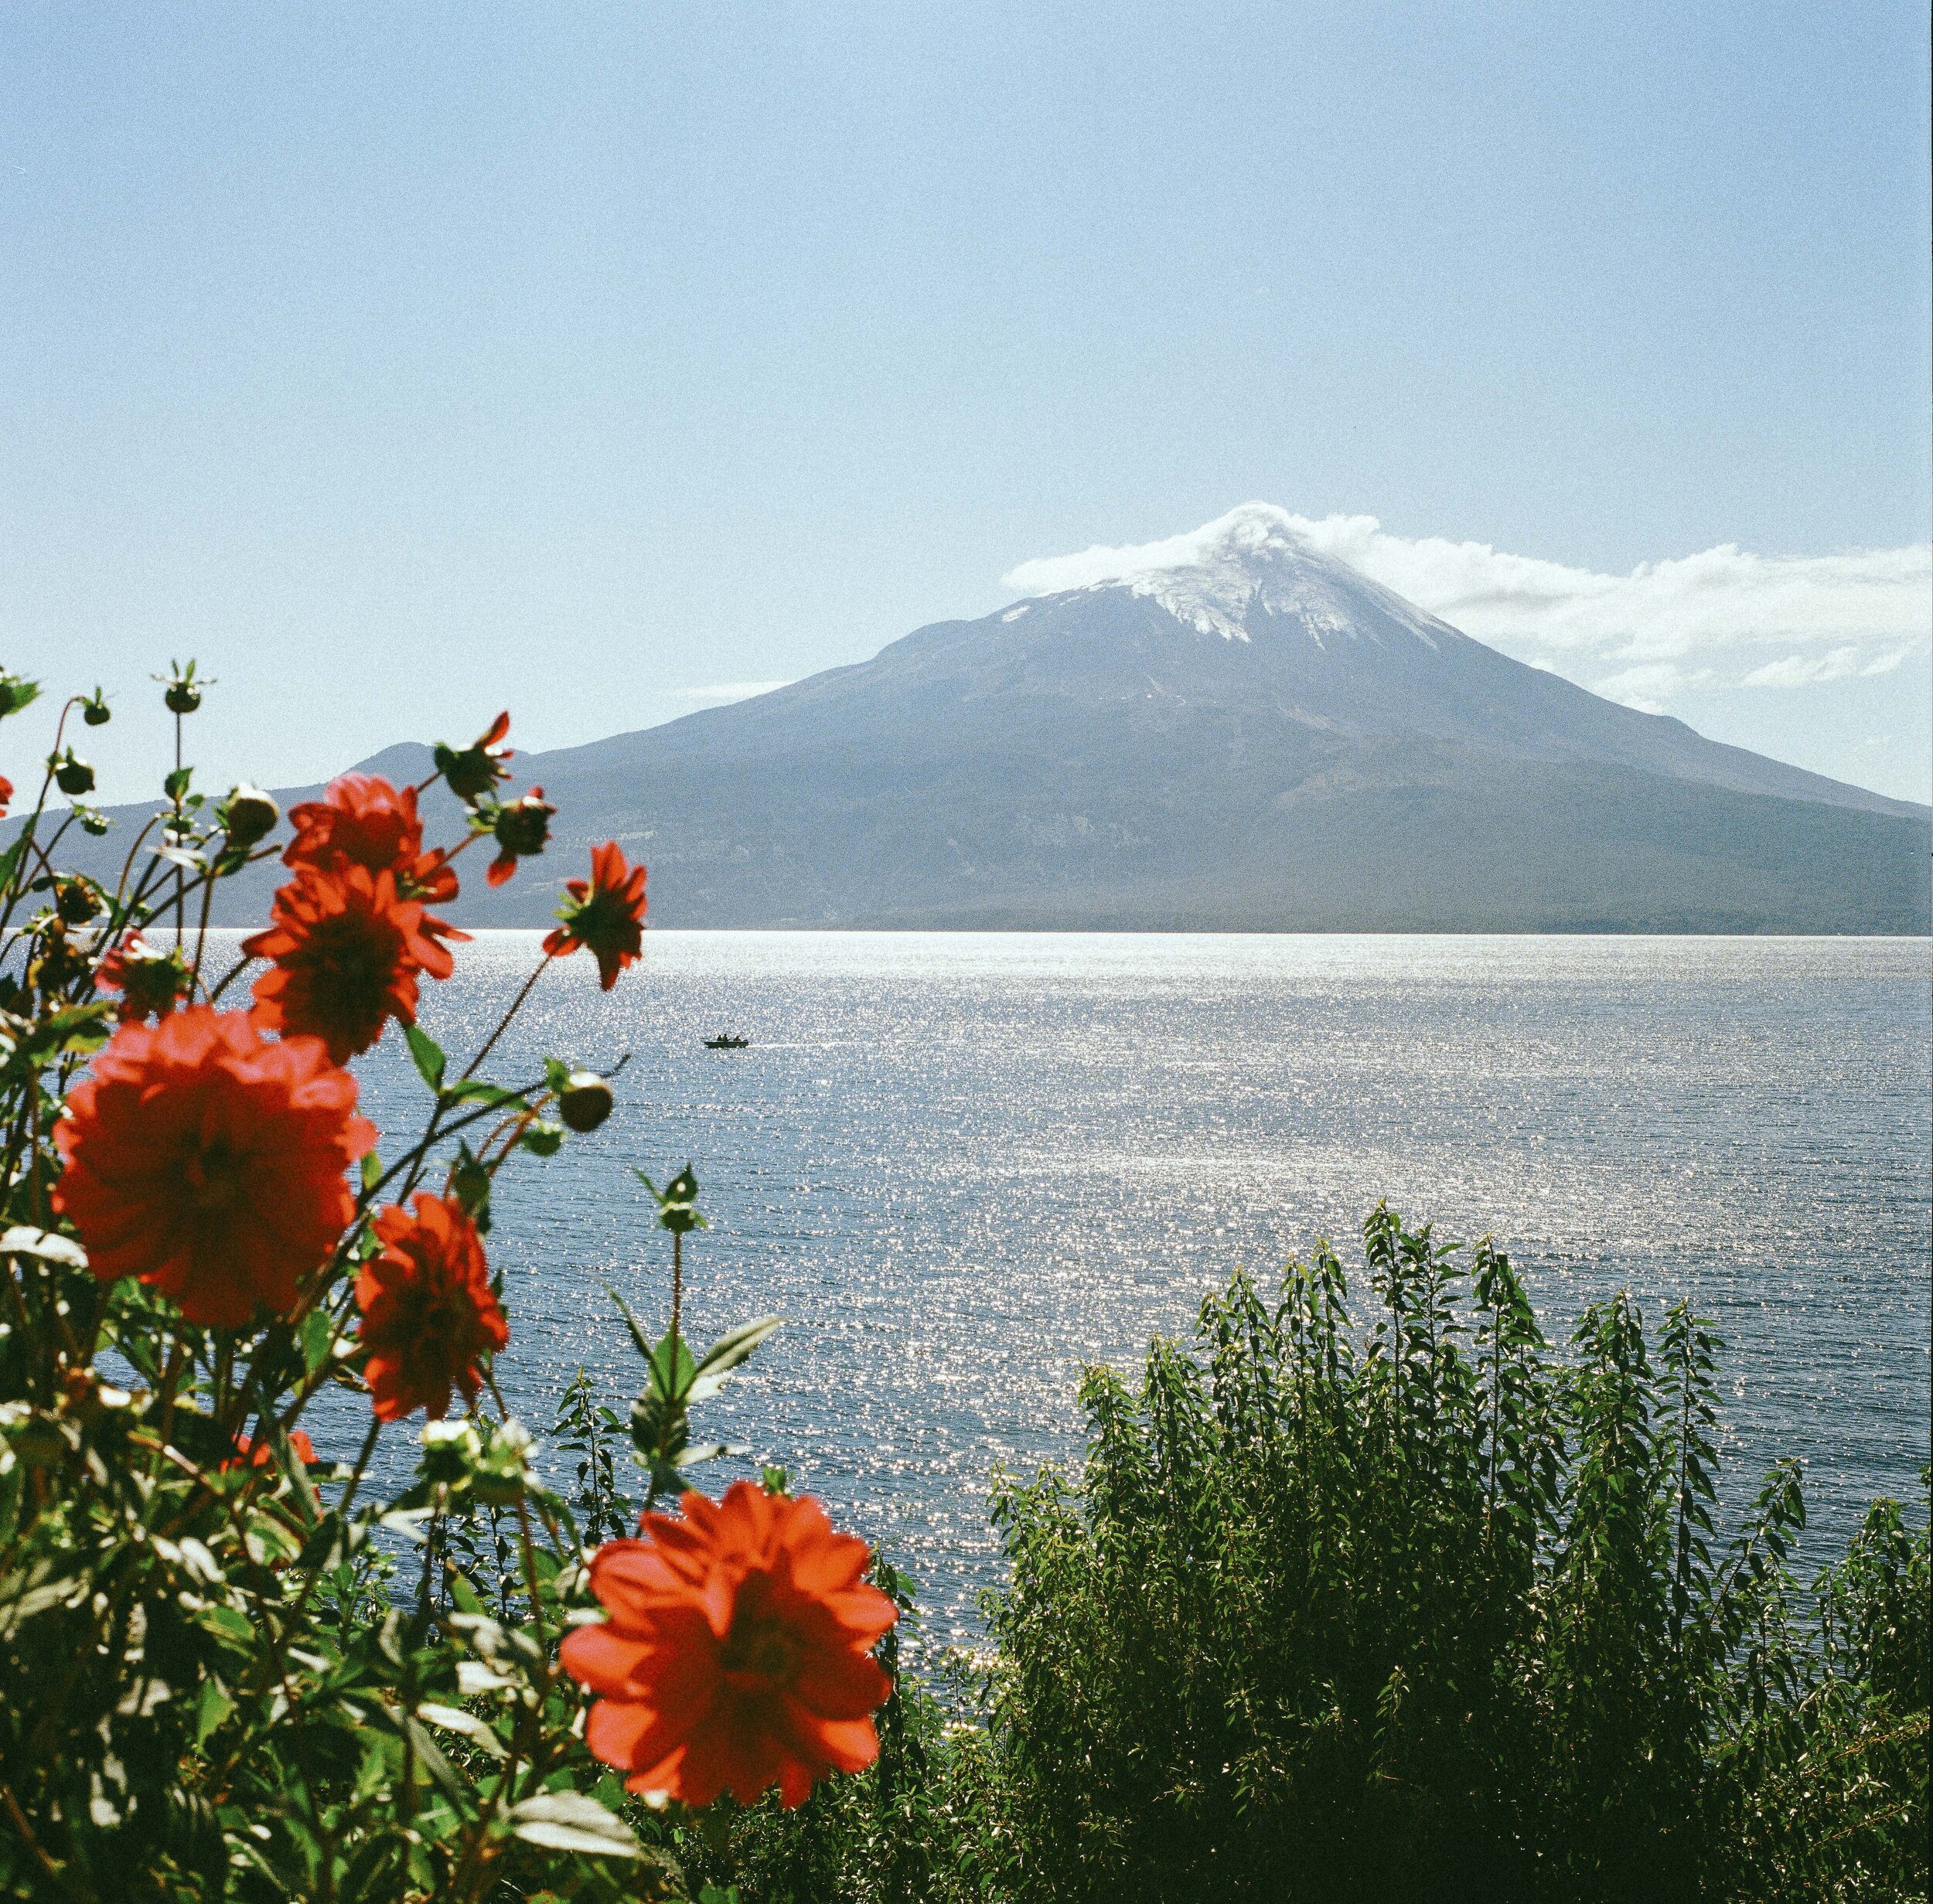 Volcan Osorno from Afar